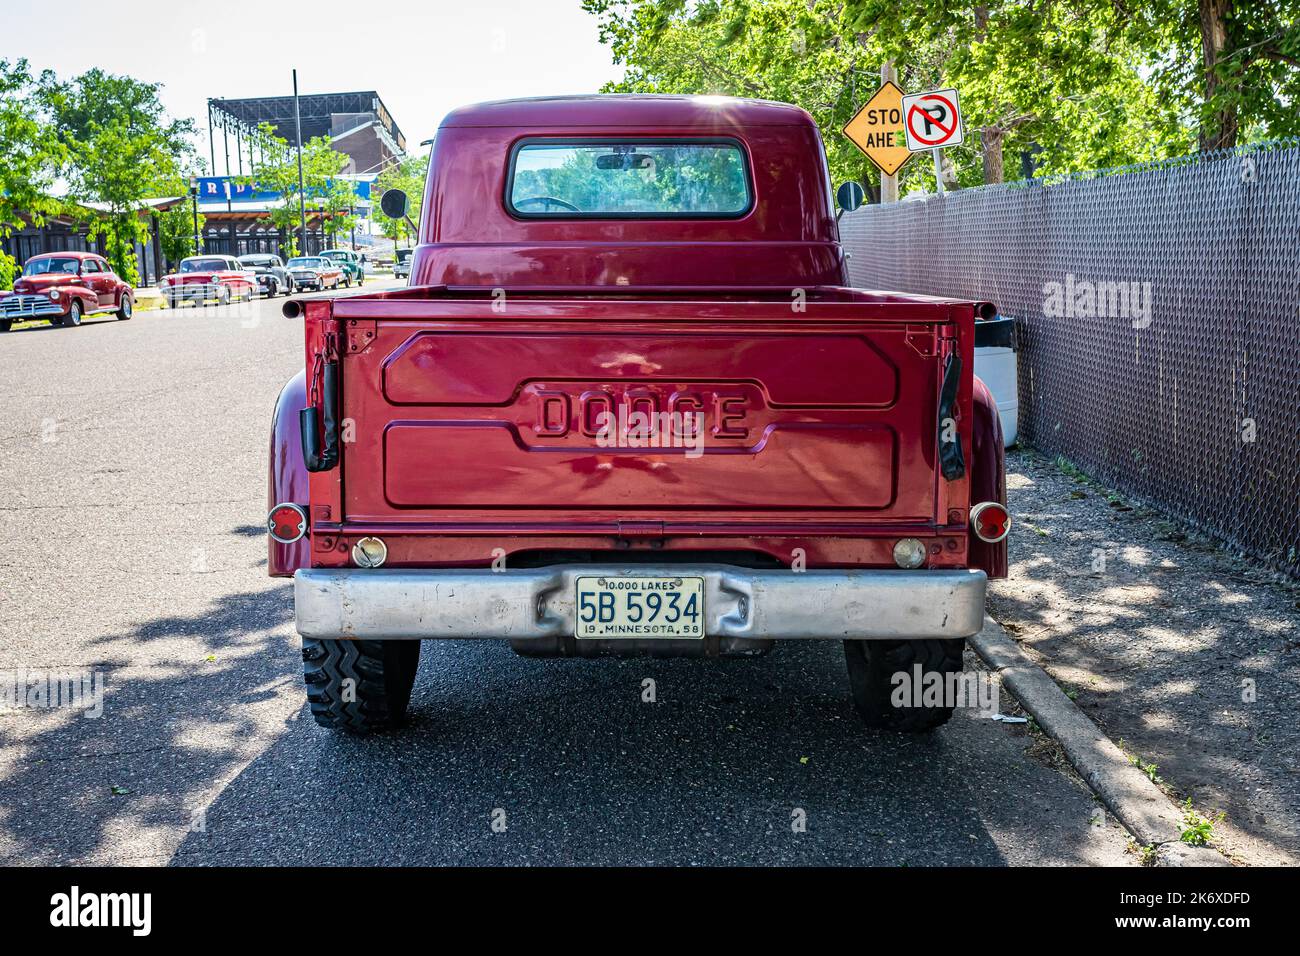 Falcon Heights, MN - June 19, 2022: High perspective rear view of a 1958 Dodge W-100 Power Wagon Pickup Truck at a local car show. Stock Photo